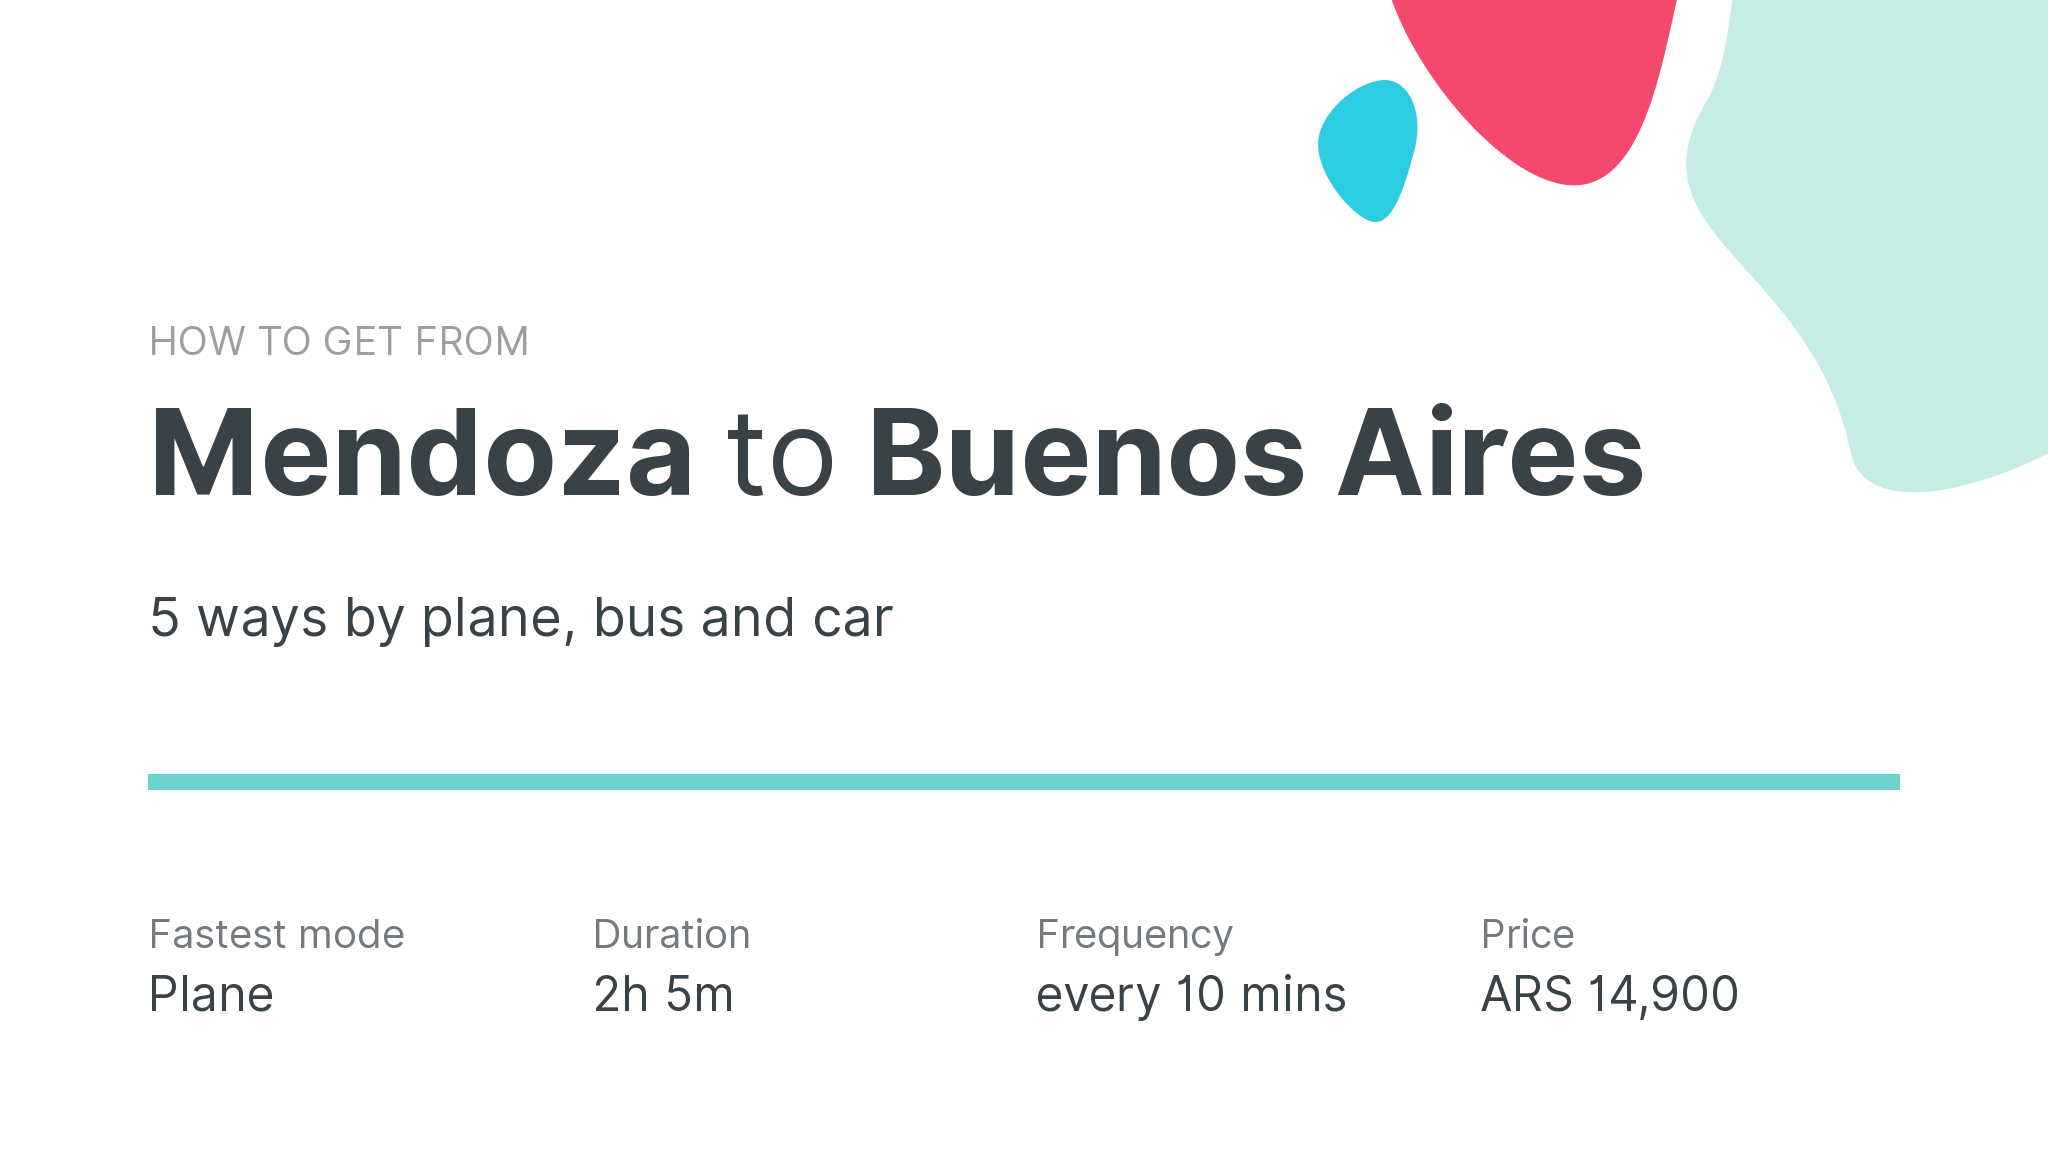 How do I get from Mendoza to Buenos Aires